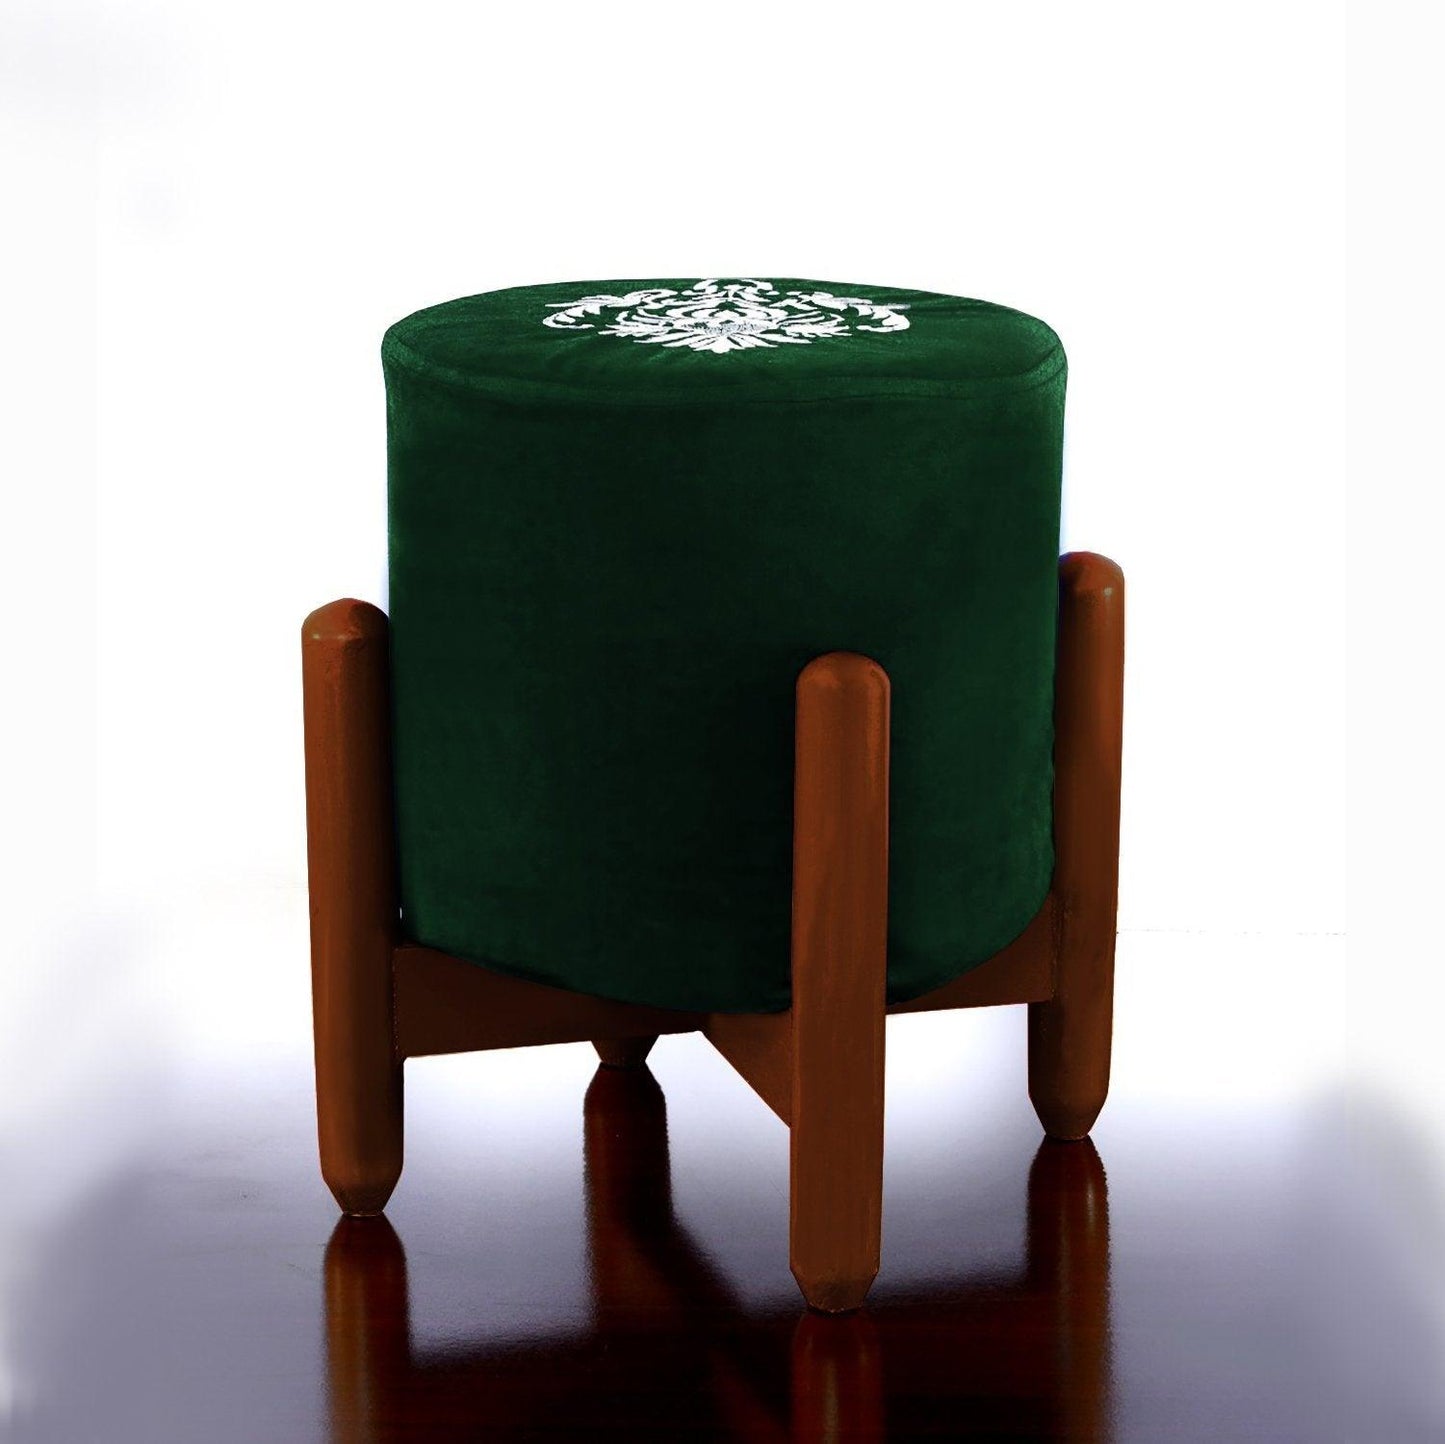 Drone Shape Round stool With Embroidery -381 - 92Bedding